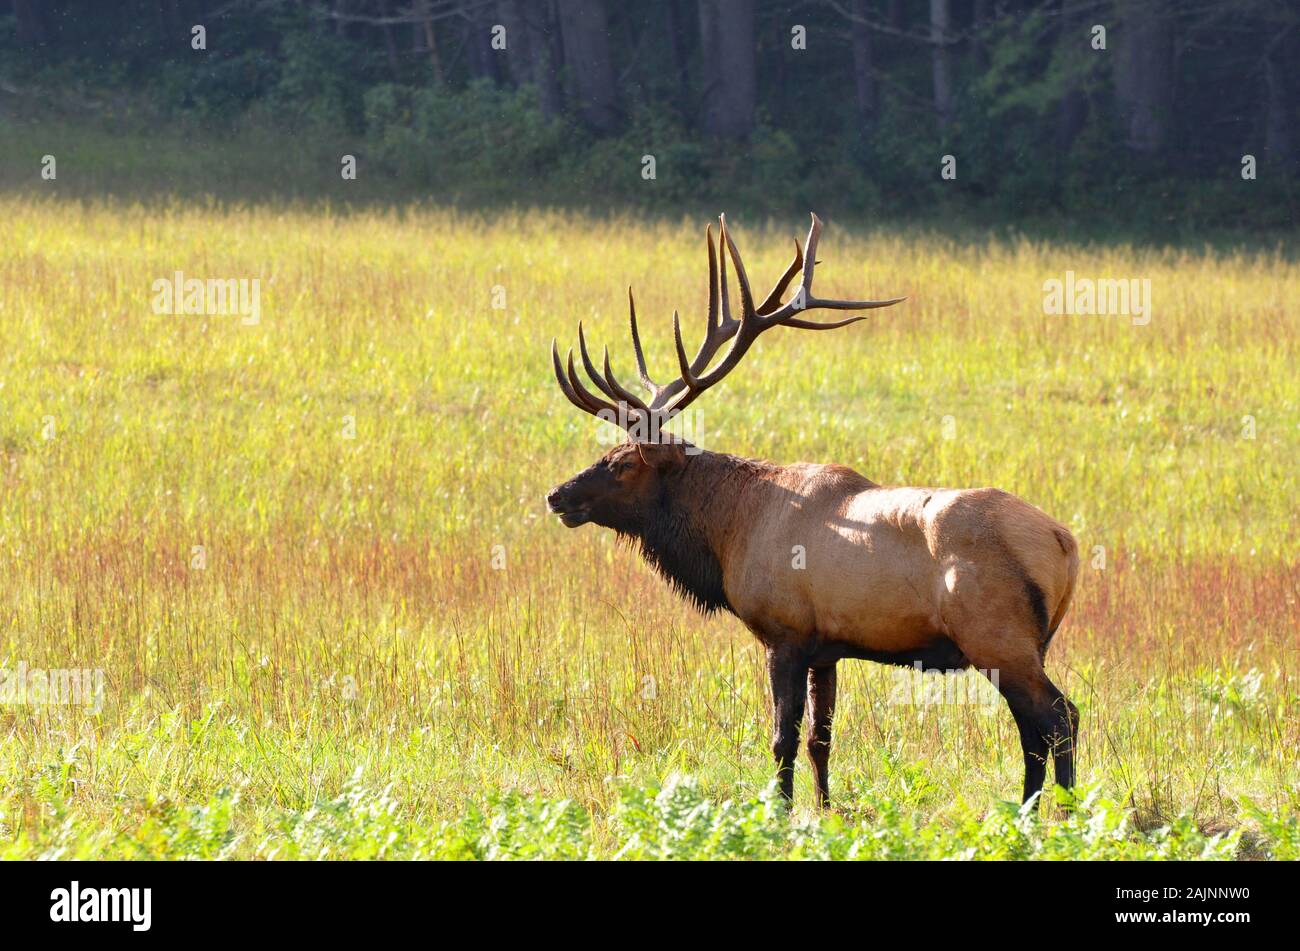 Bull elk during autumn at Cataloochee Valley in the Great Smoky Mountains of North Carolina Stock Photo